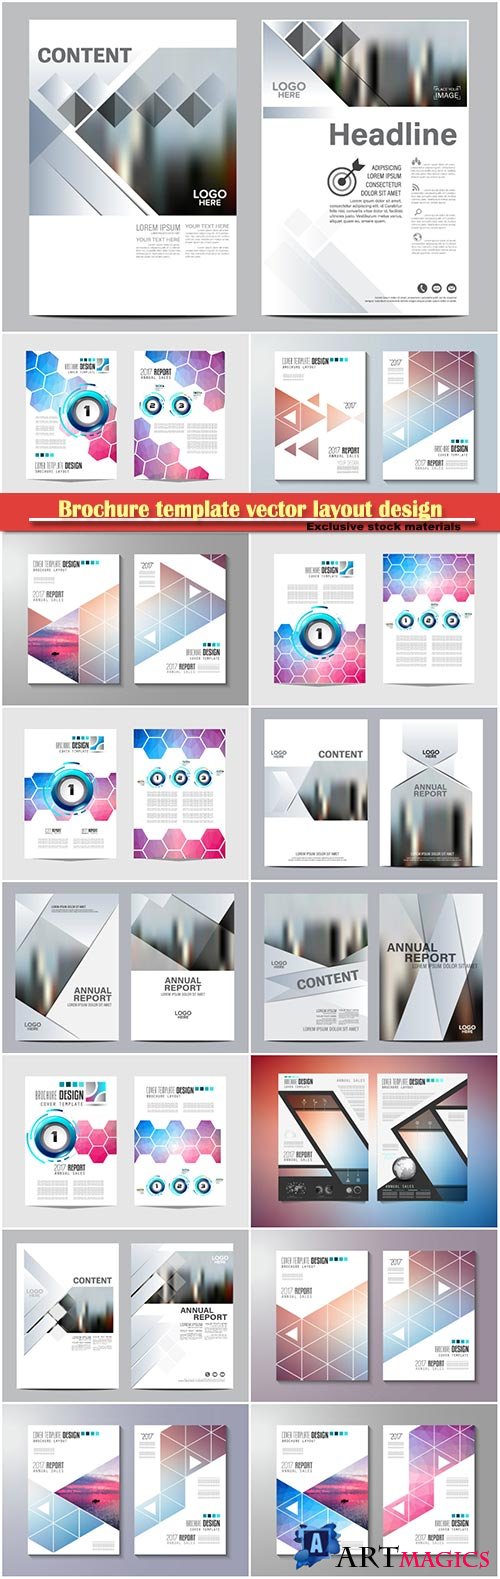 Brochure template vector layout design, corporate business annual report, magazine, flyer mockup # 118